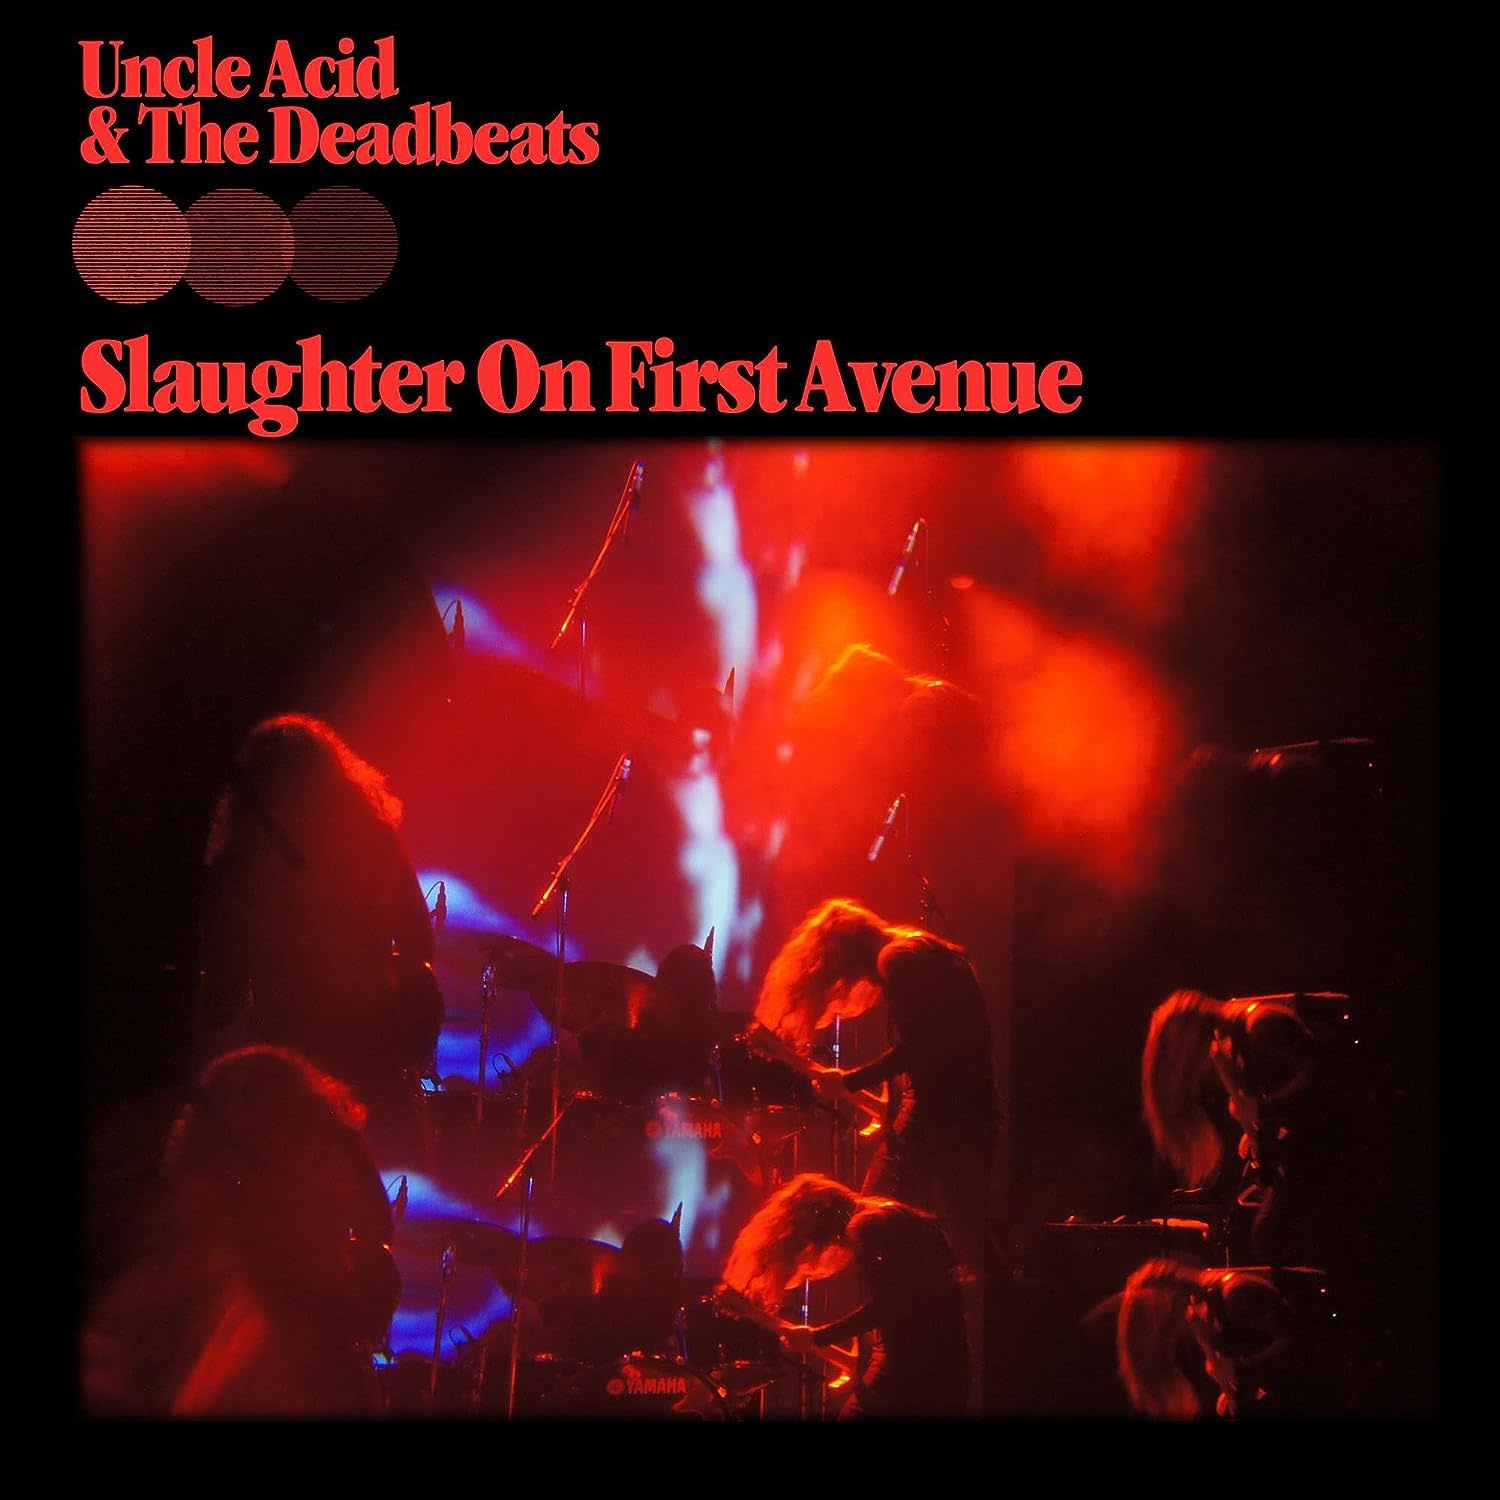 Uncle Acid & The Deadbeats – Slaughter on First Avenue